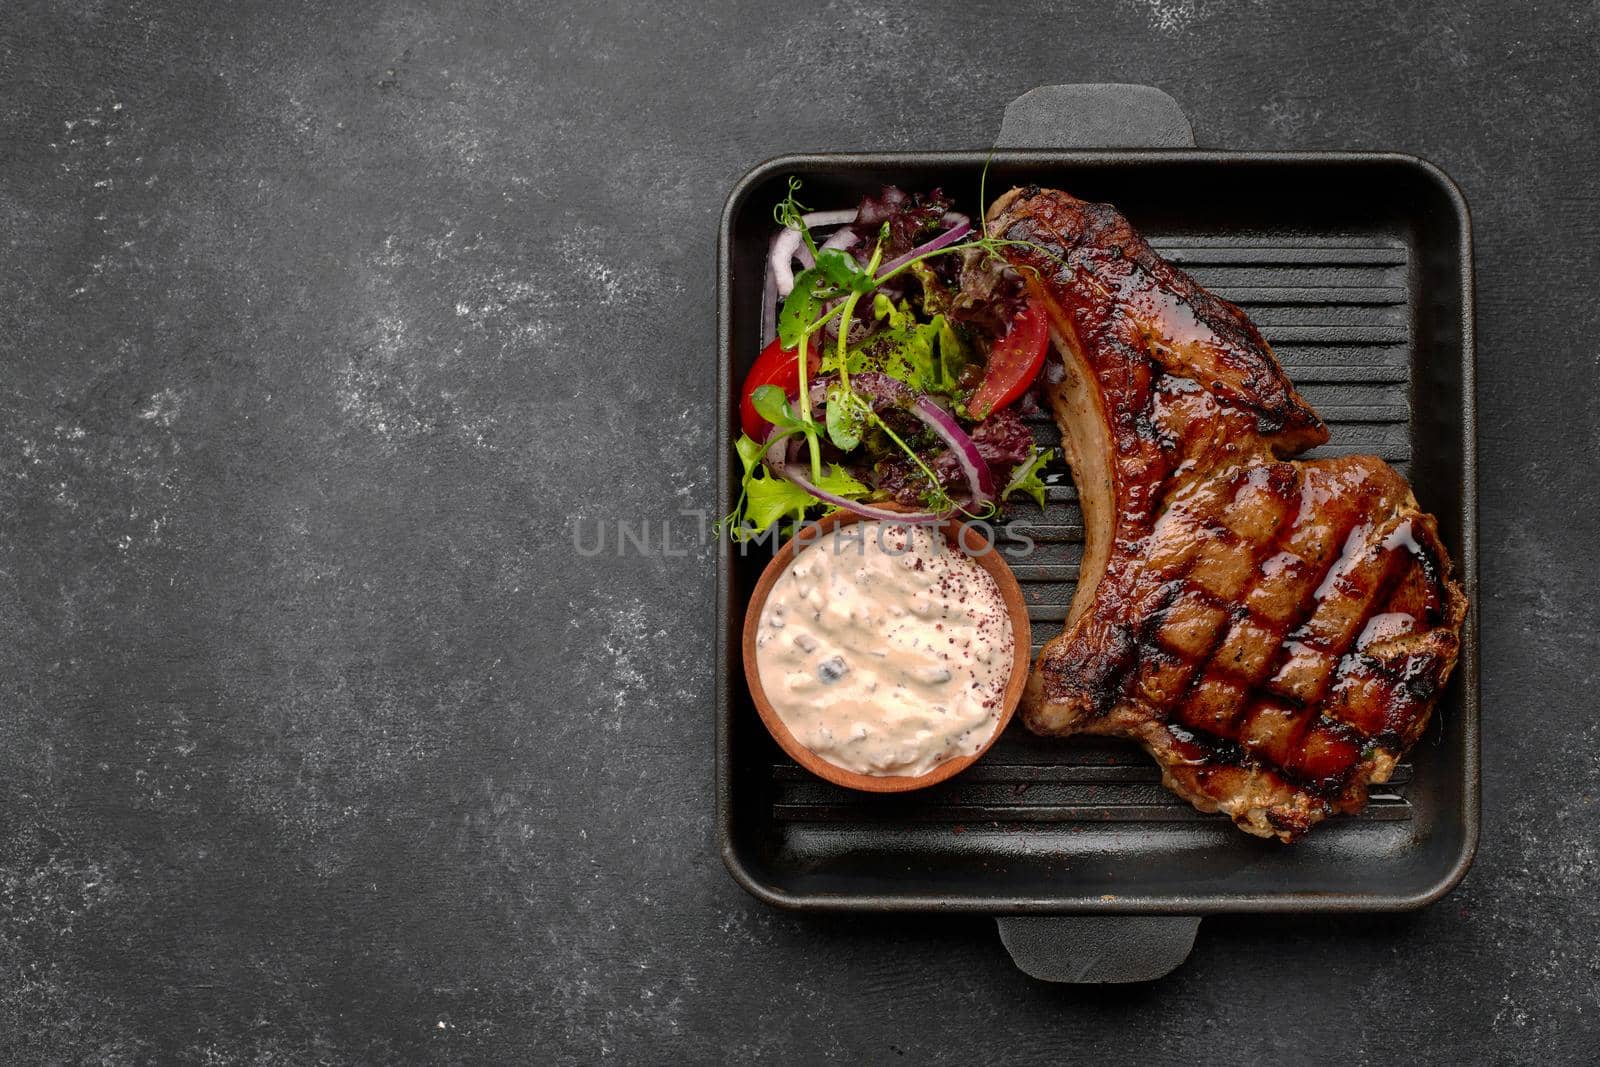 Grilled steak with sauce, vegetables and herbs, on a black frying pan, on a dark background